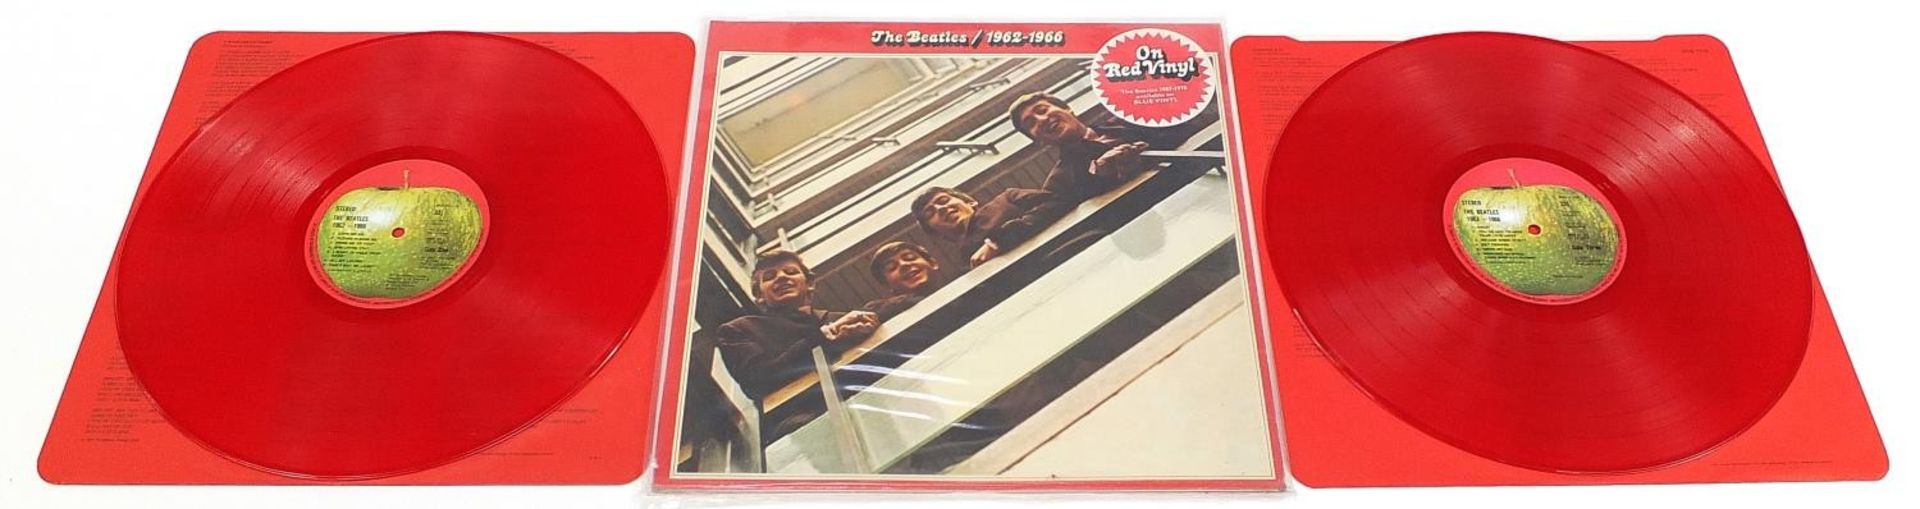 Nine The Beatles 1962-1966 vinyl LP records including Special Double Album set and red vinyl - Image 19 of 20